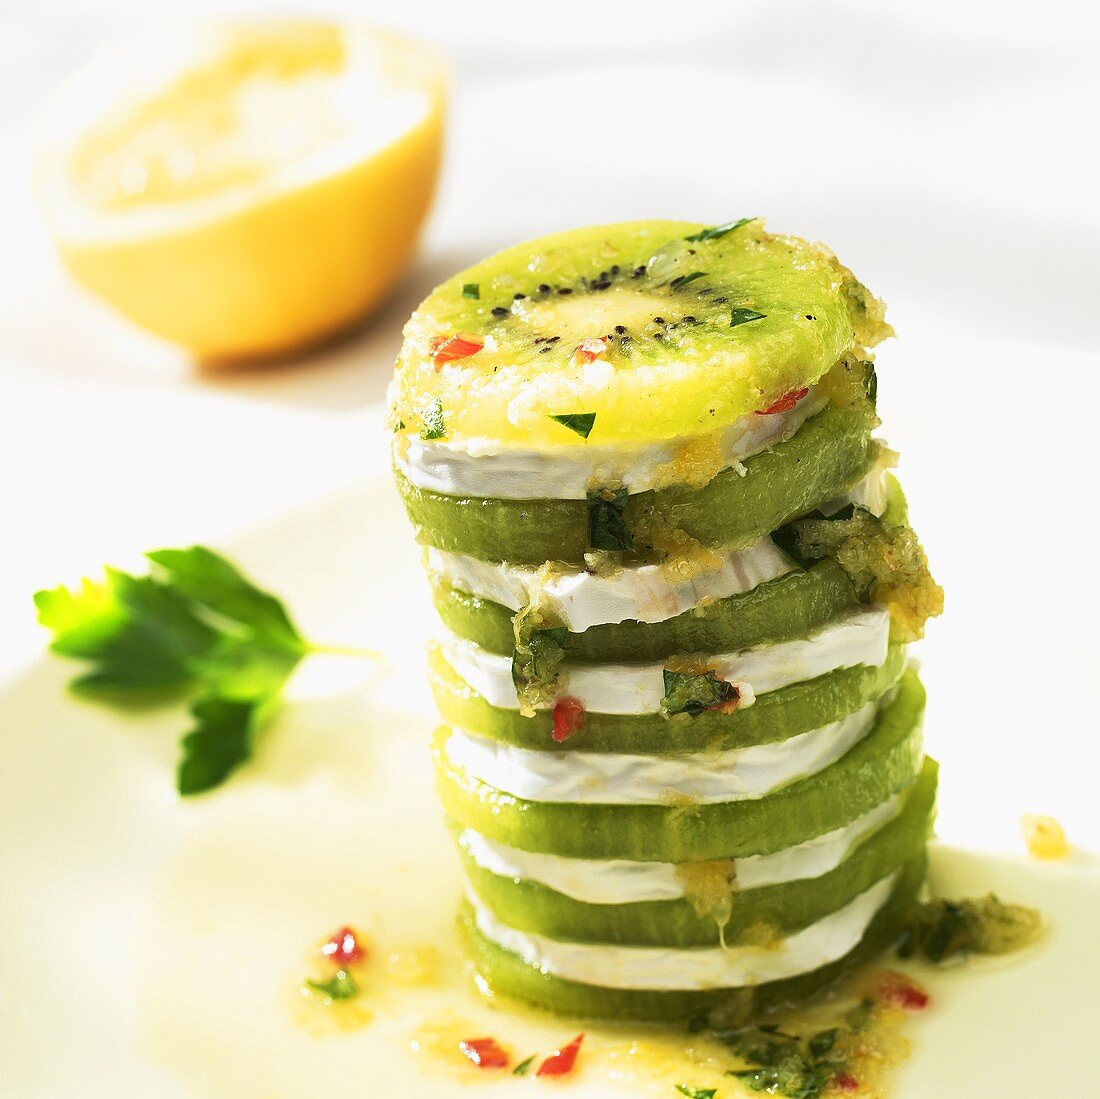 Spicy kiwi fruit and soft cheese tower